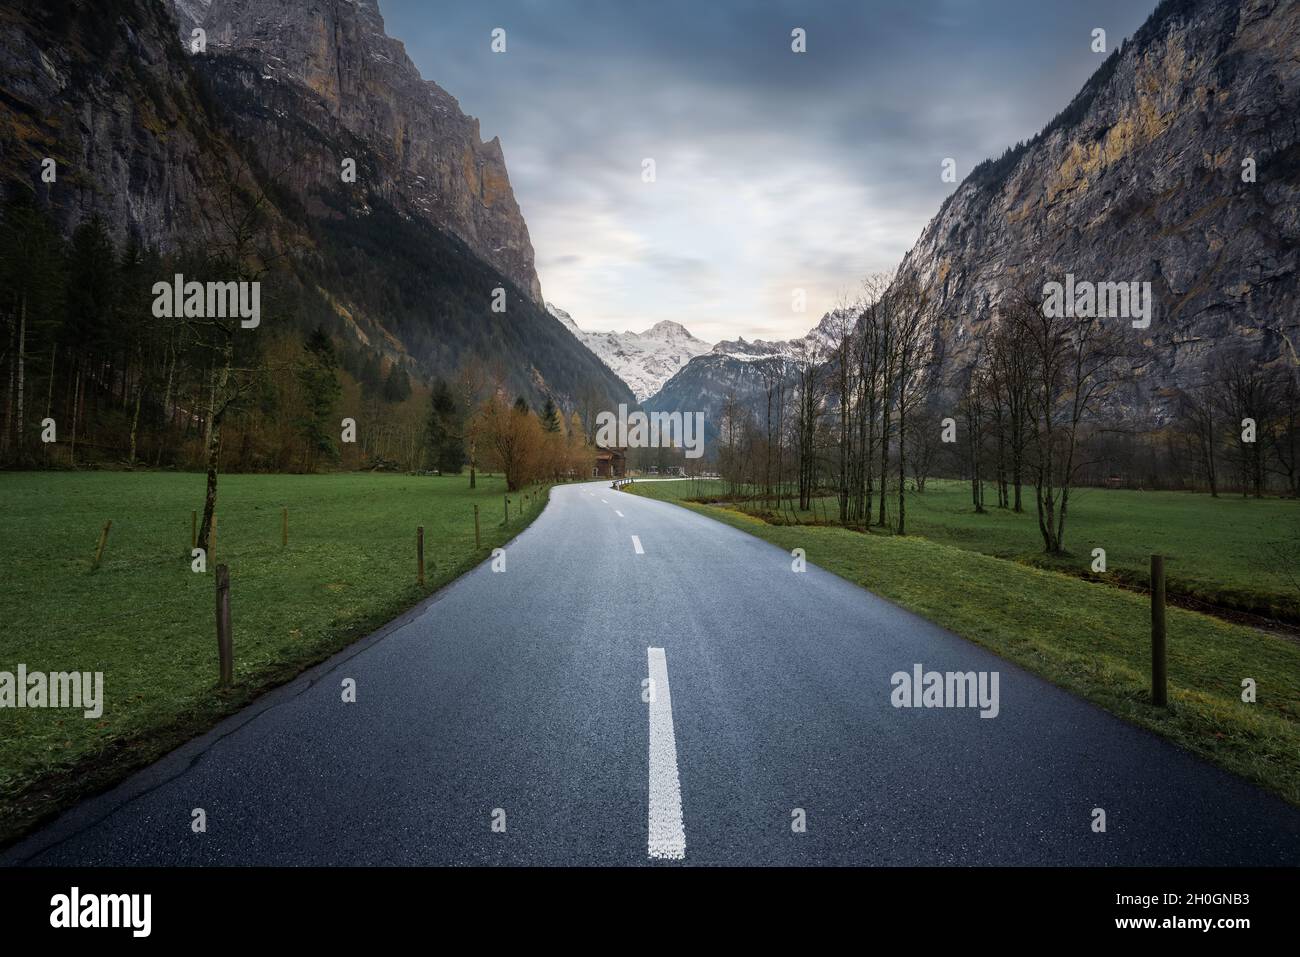 Road view leading straight into Bernese Alps Mountains - Lauterbrunnen, Switzerland Stock Photo